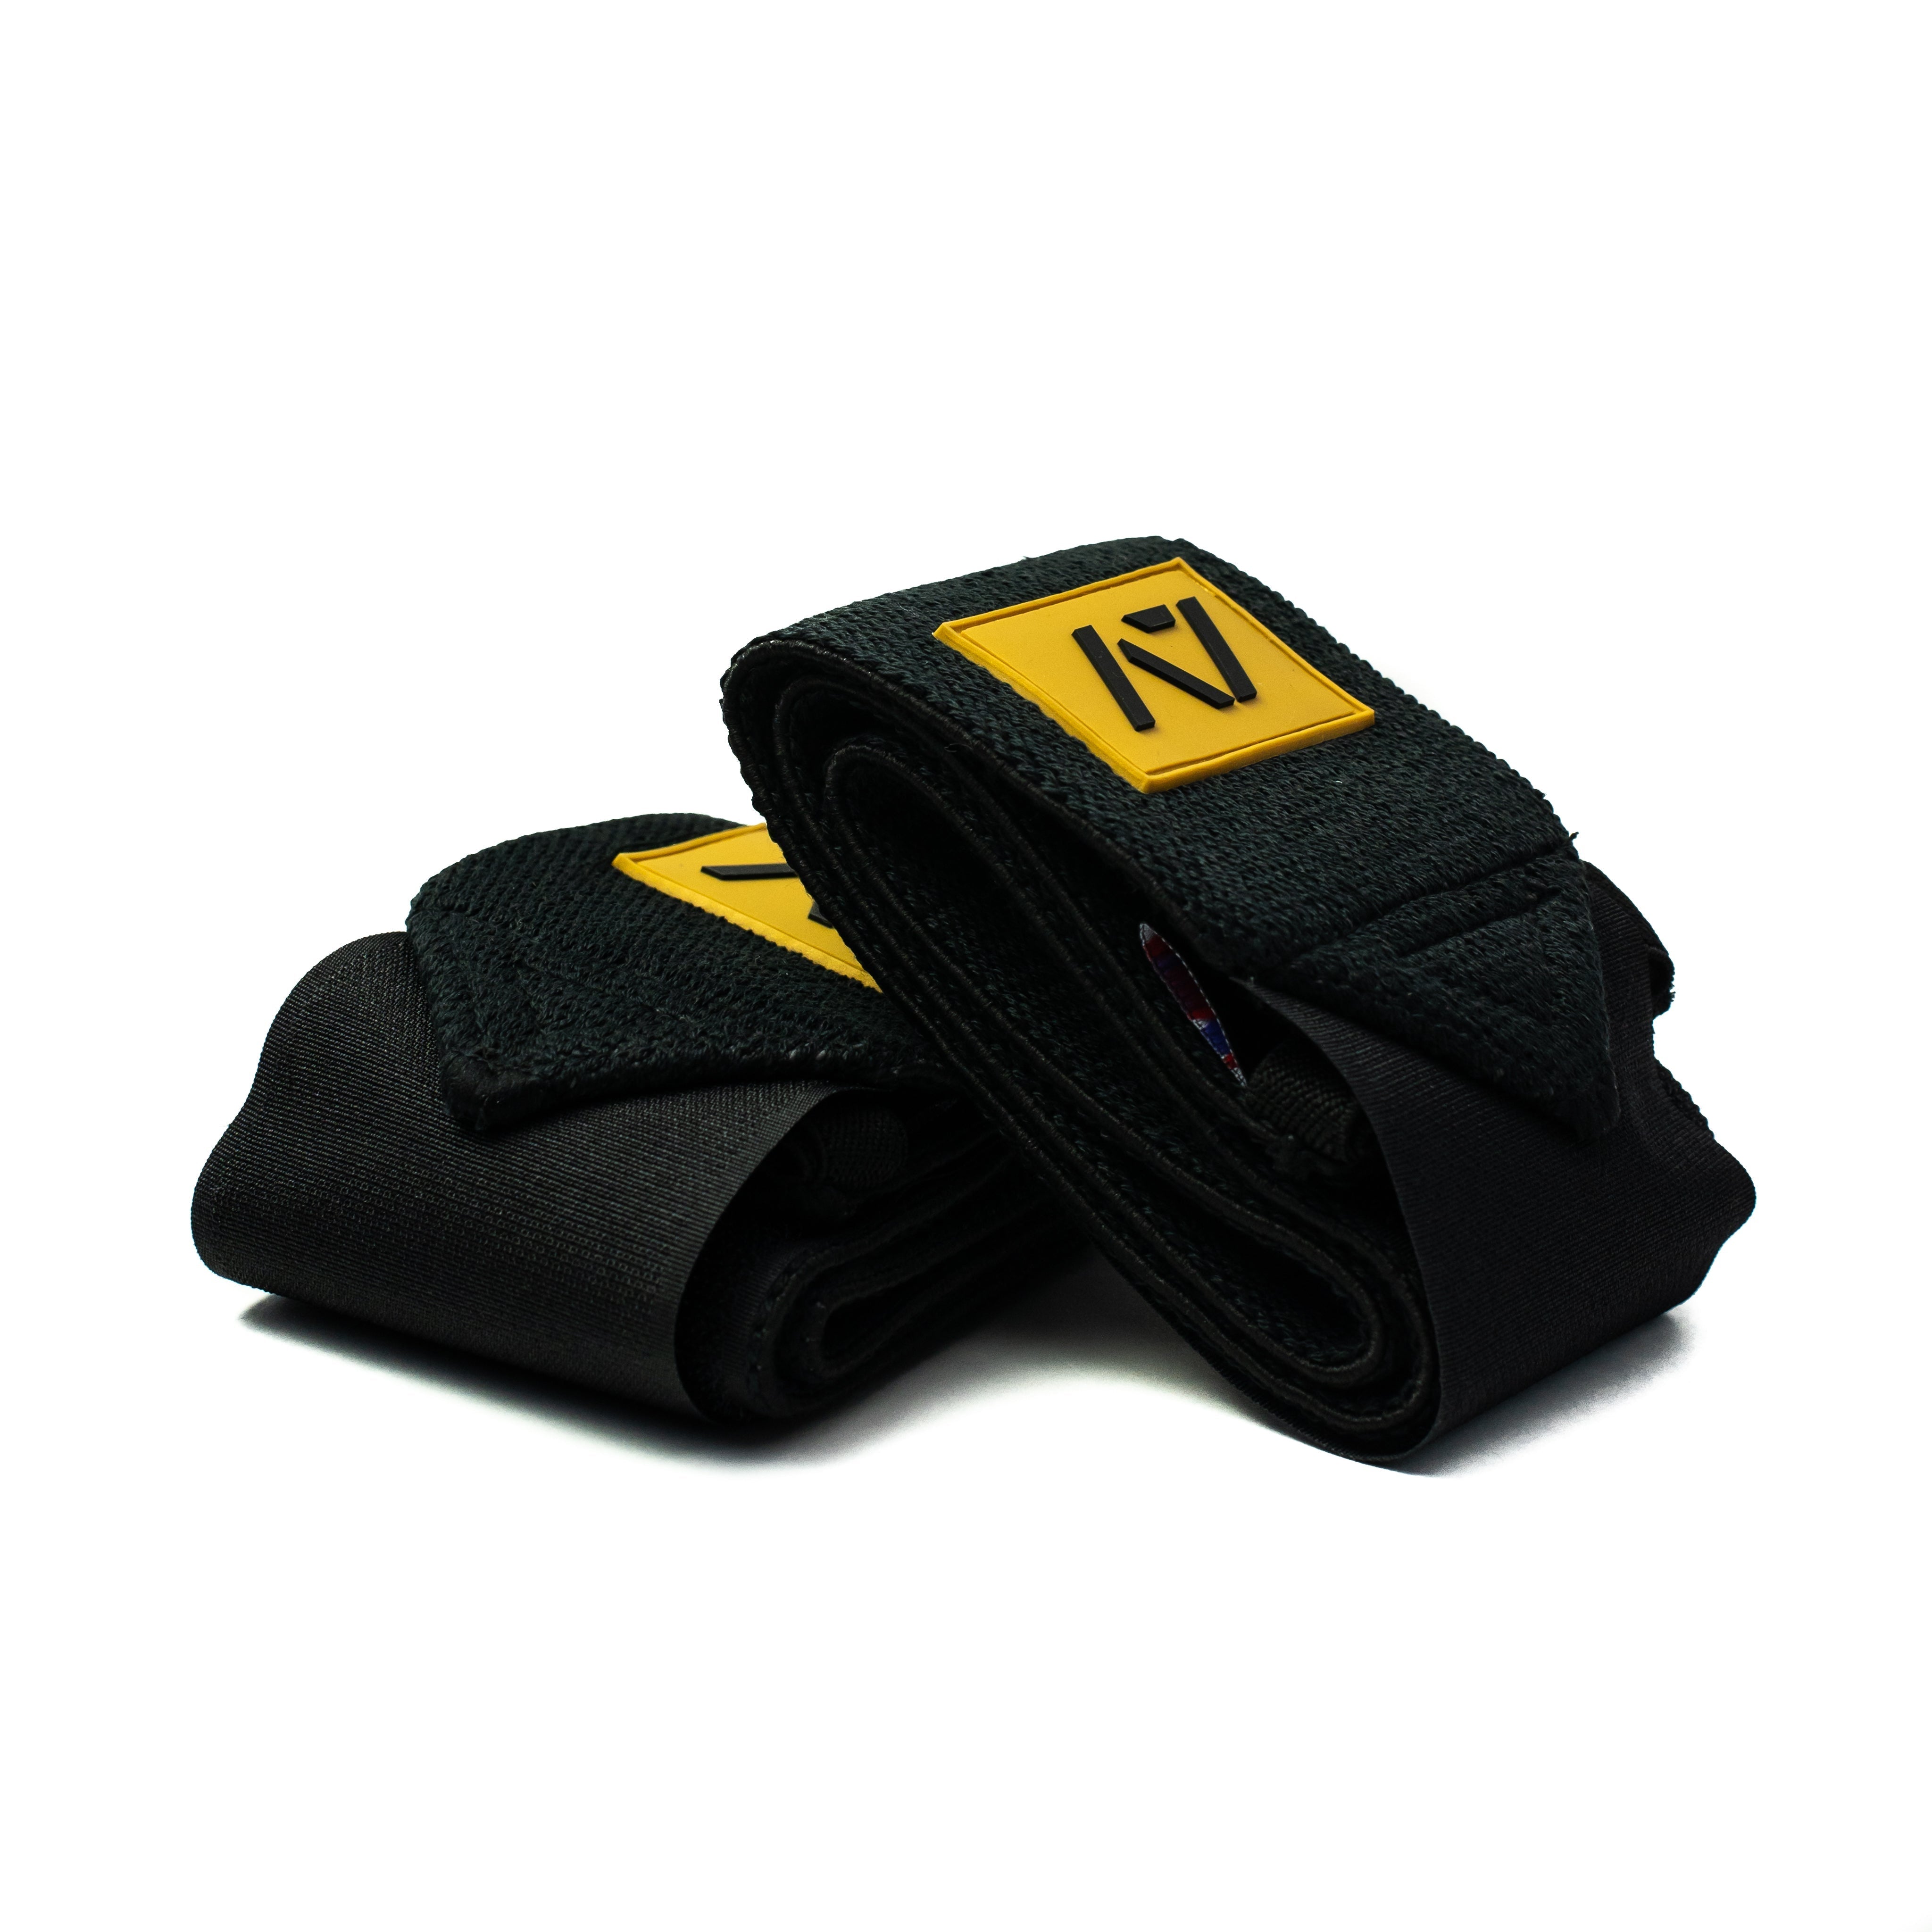 Whether you are benching or squatting, A7 wrist wraps are a perfect addition to your gym bag and IPF approved kit. These wraps feature double thumb loops so you don't ever have to worry about which way you have to put them on. We offer these wrist wraps in 3 sizes : 55 cm, 77 cm and 99 cm.

A7 Wrist Wraps are IPF approved. 